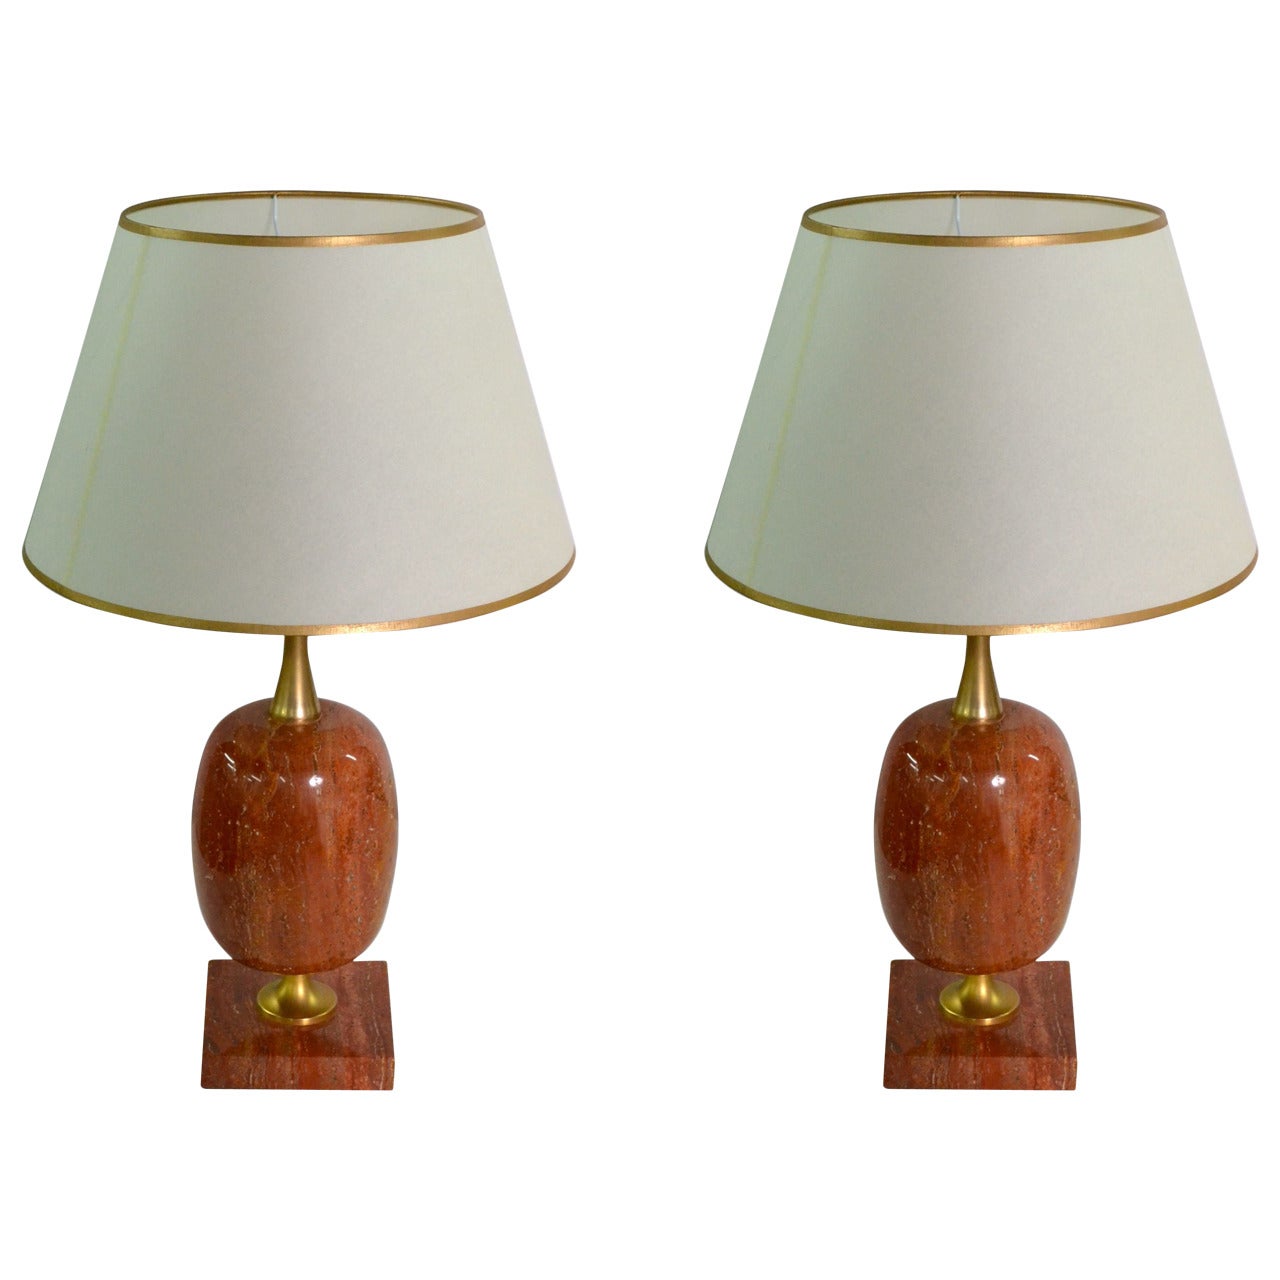 Pair of 1960s Rose Marble & Brass Lamps by Maison Jansen